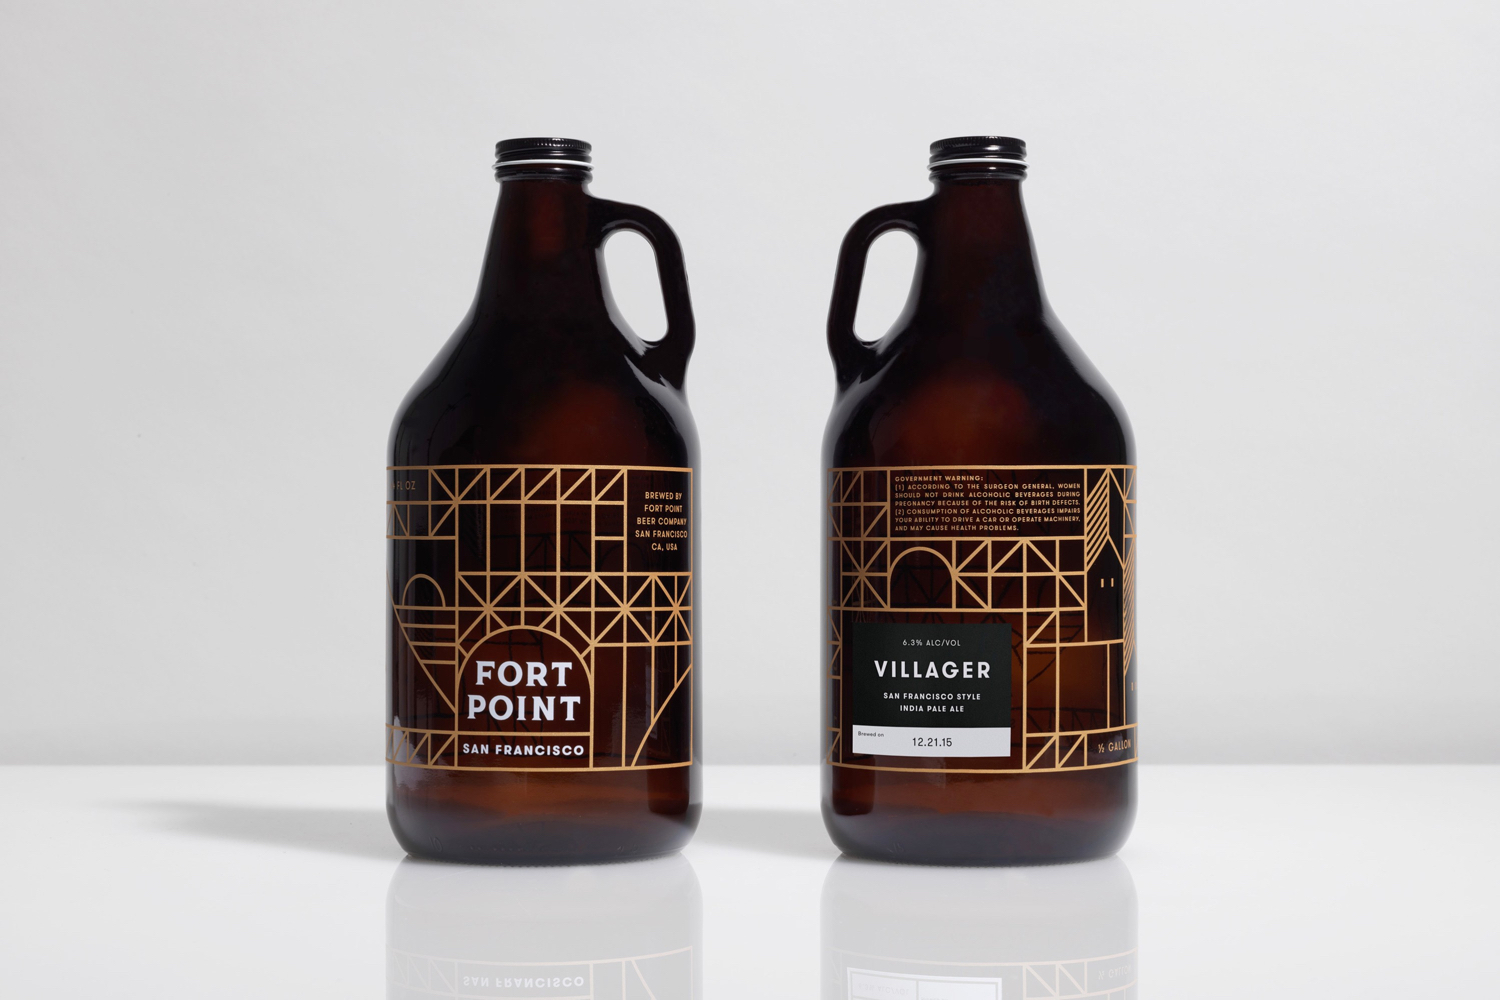 Package design for Fort Point Beer Company by San Francisco based graphic design studio Manual